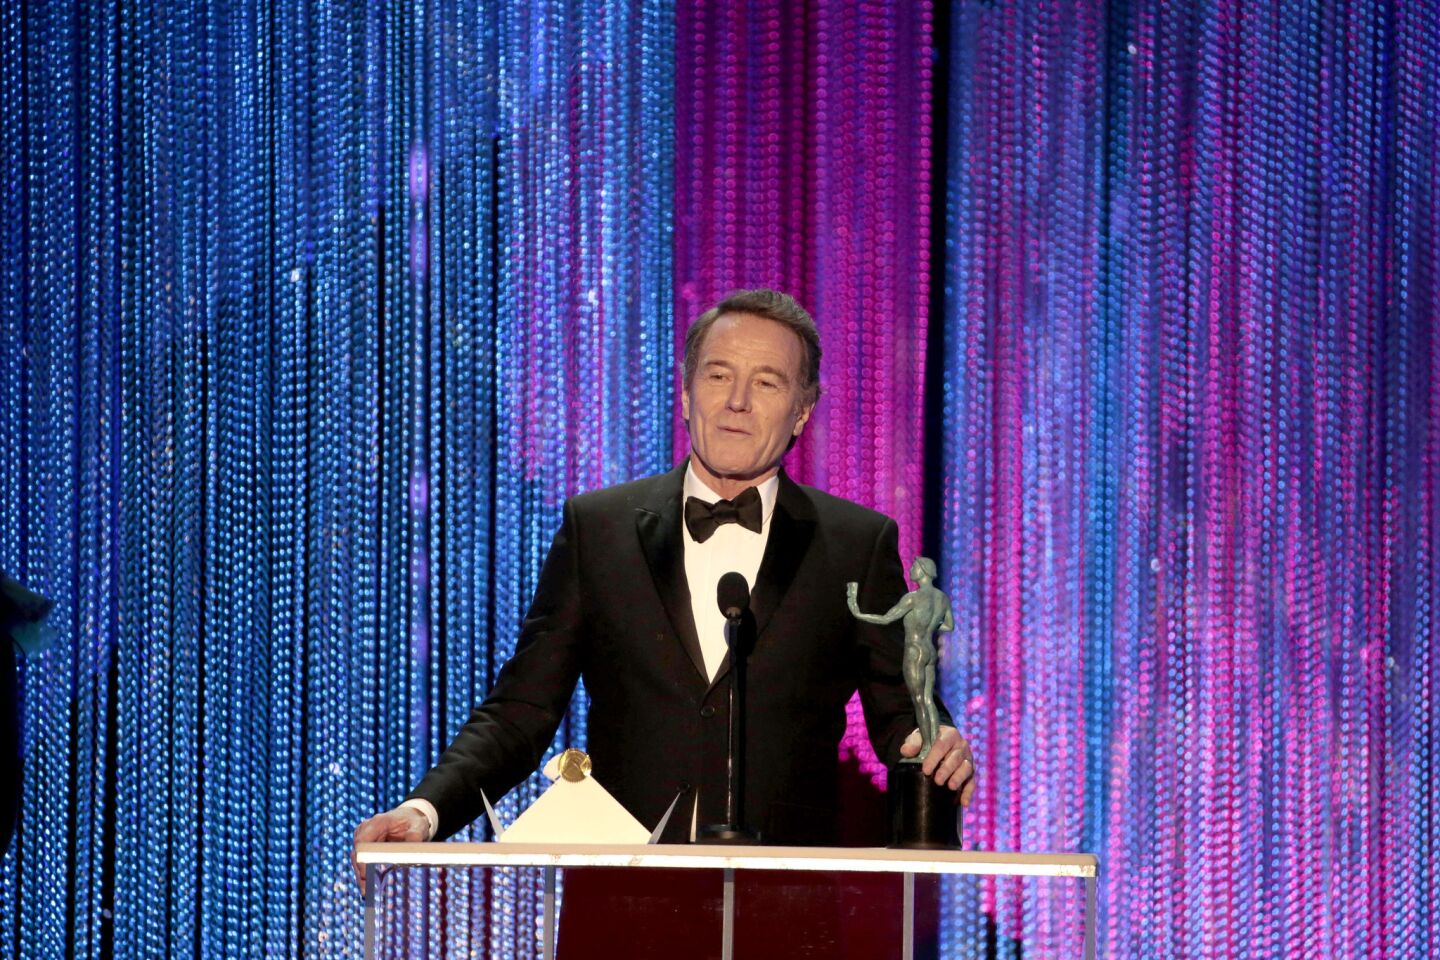 LOS ANGELES, CA - January 29, 2017â€” Bryan Cranston won the ACTOR for Male Actor in a Television Movie or Limited Series during the show at the 23rd Annual Screen Actors Guild Awards at the Shrine Auditorium in Los Angeles, CA on Sunday, January 29, 2017. (Robert Gauthier / Los Angeles Times)